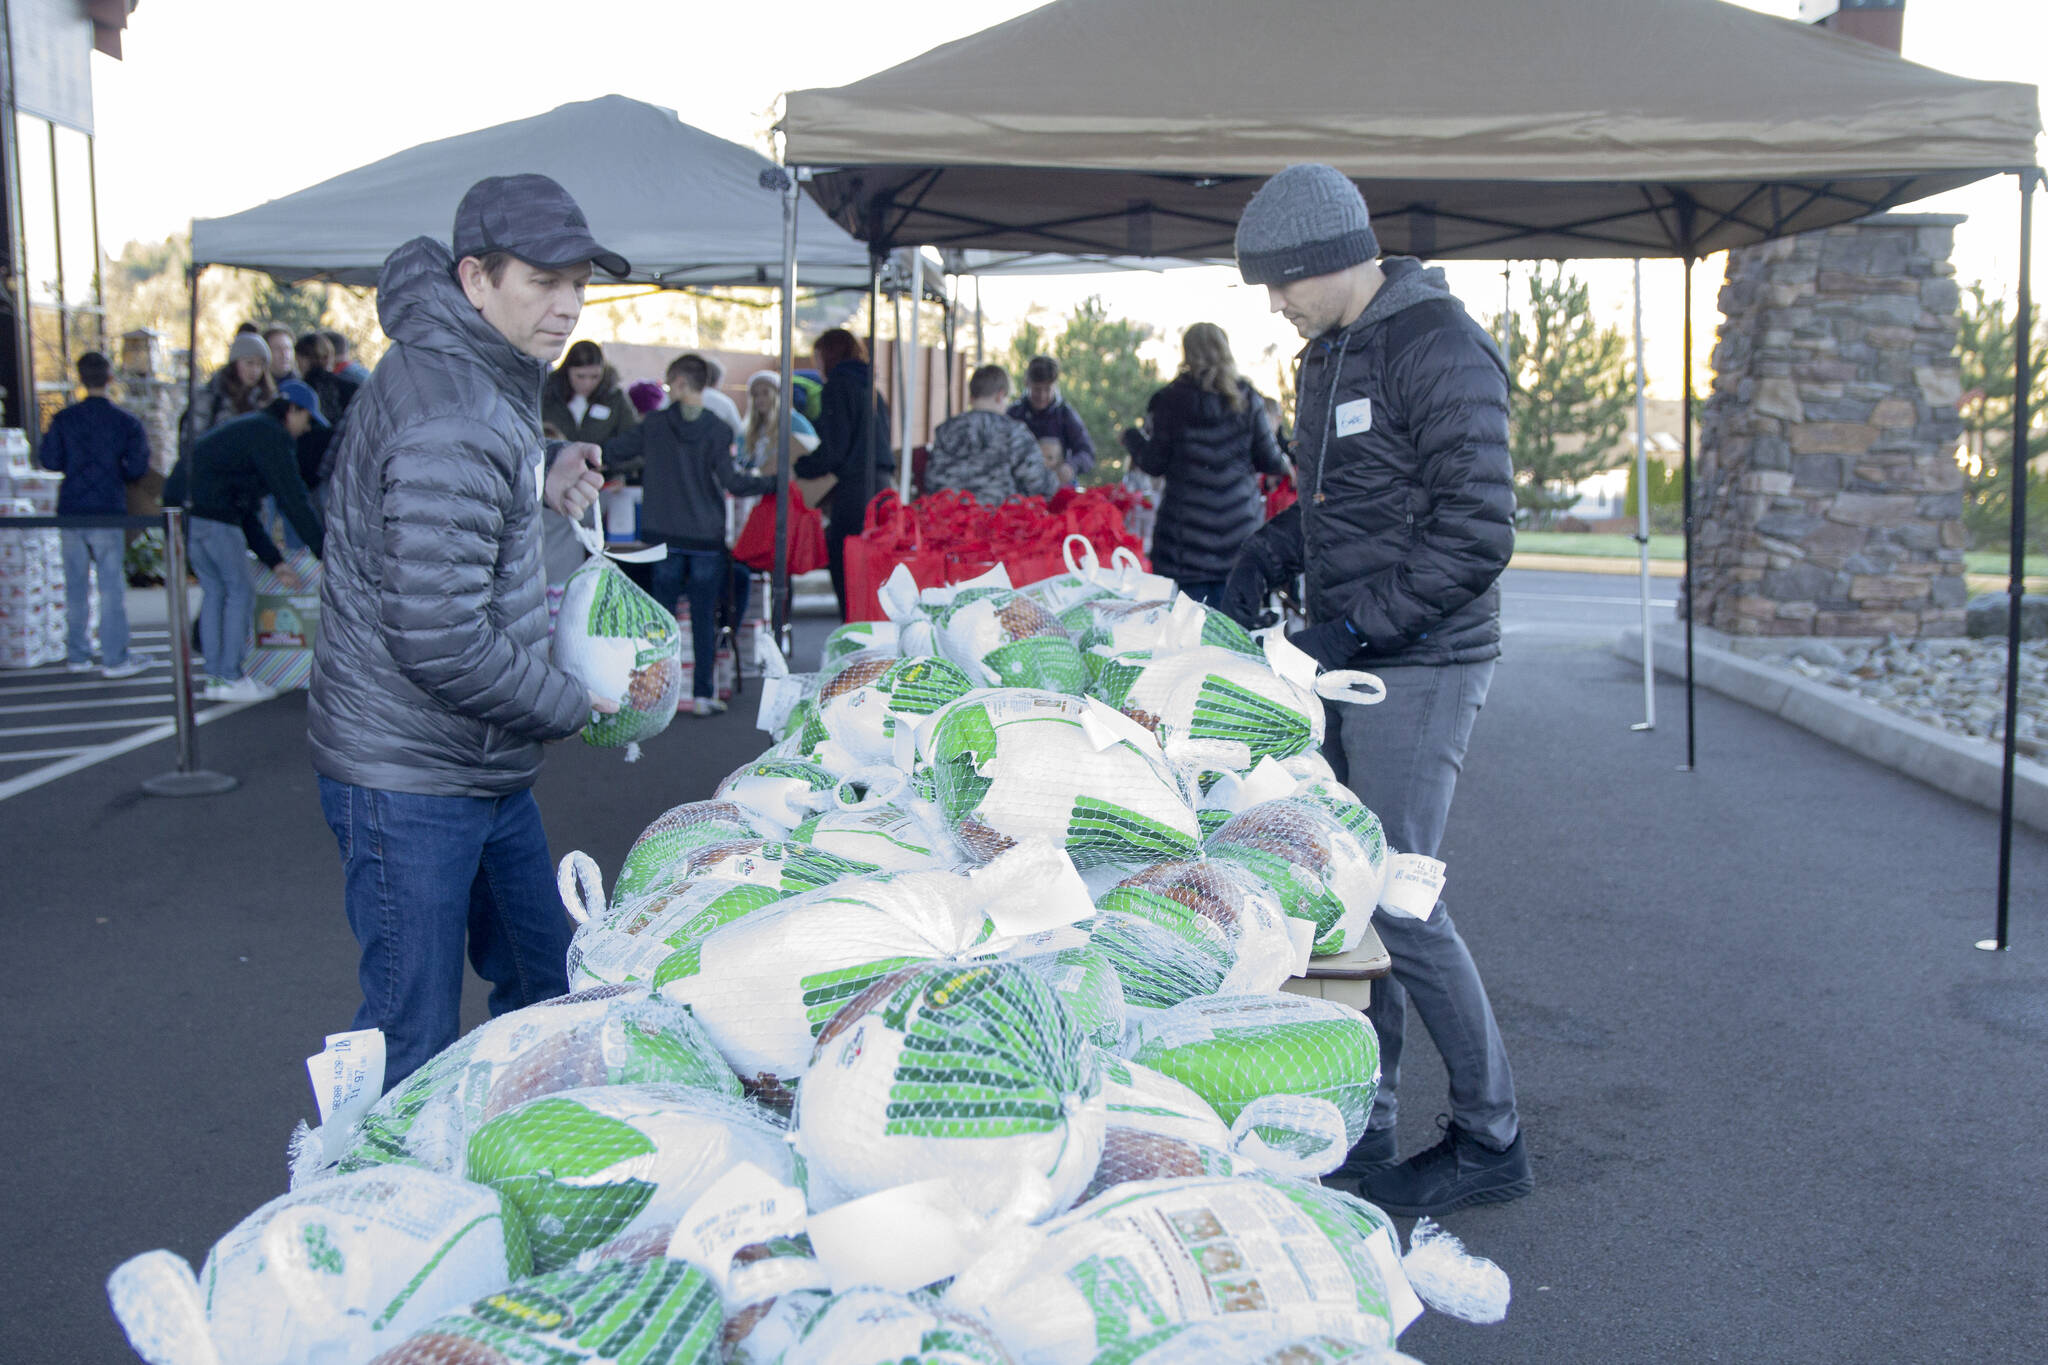 Photo courtesy of Eastridge Church
Turkeys purchased with the help of donations received form the community were given out on Saturday, Nov. 17, at Eastridge Church in Issaquah.